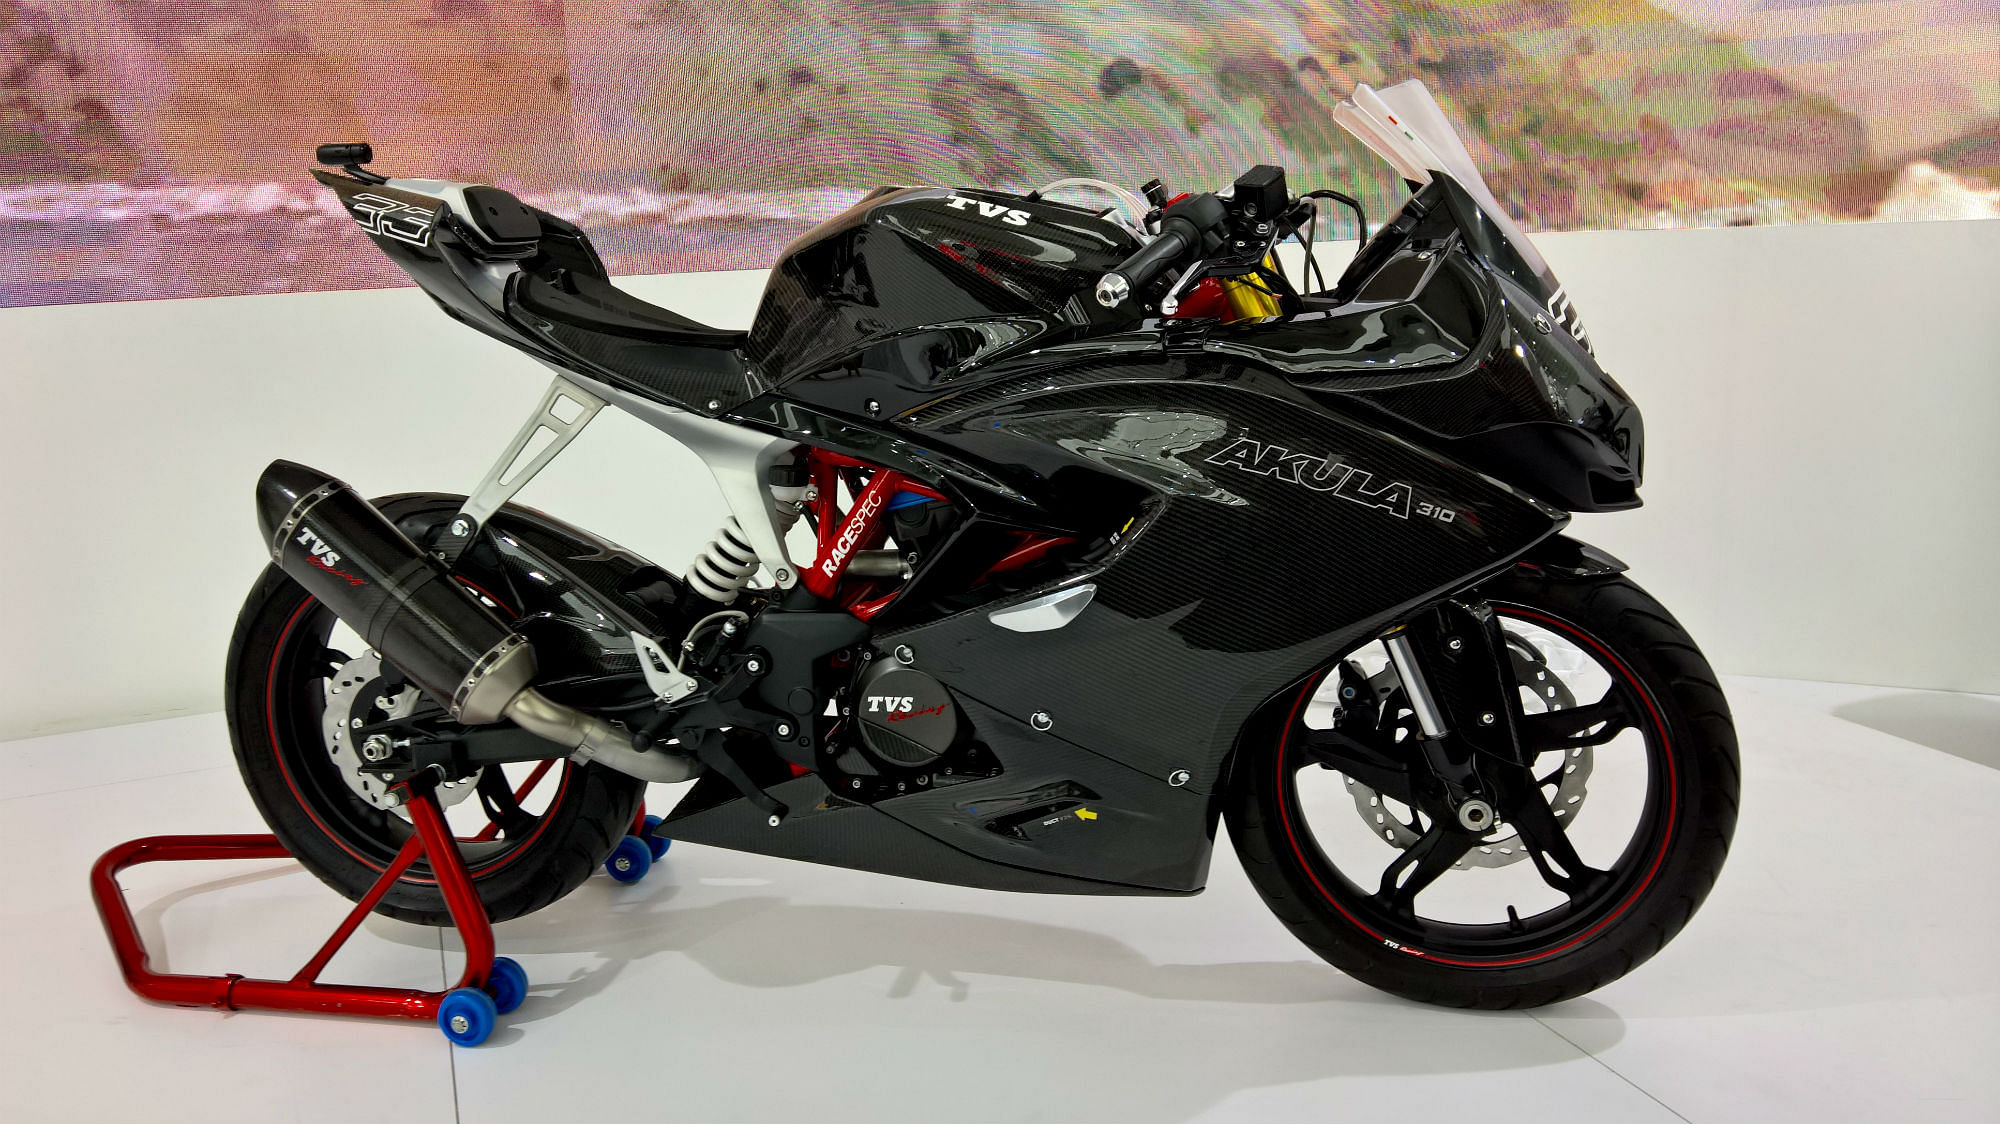 Tvs Readies Its 300cc Racing Bike For India Will It Be Apache